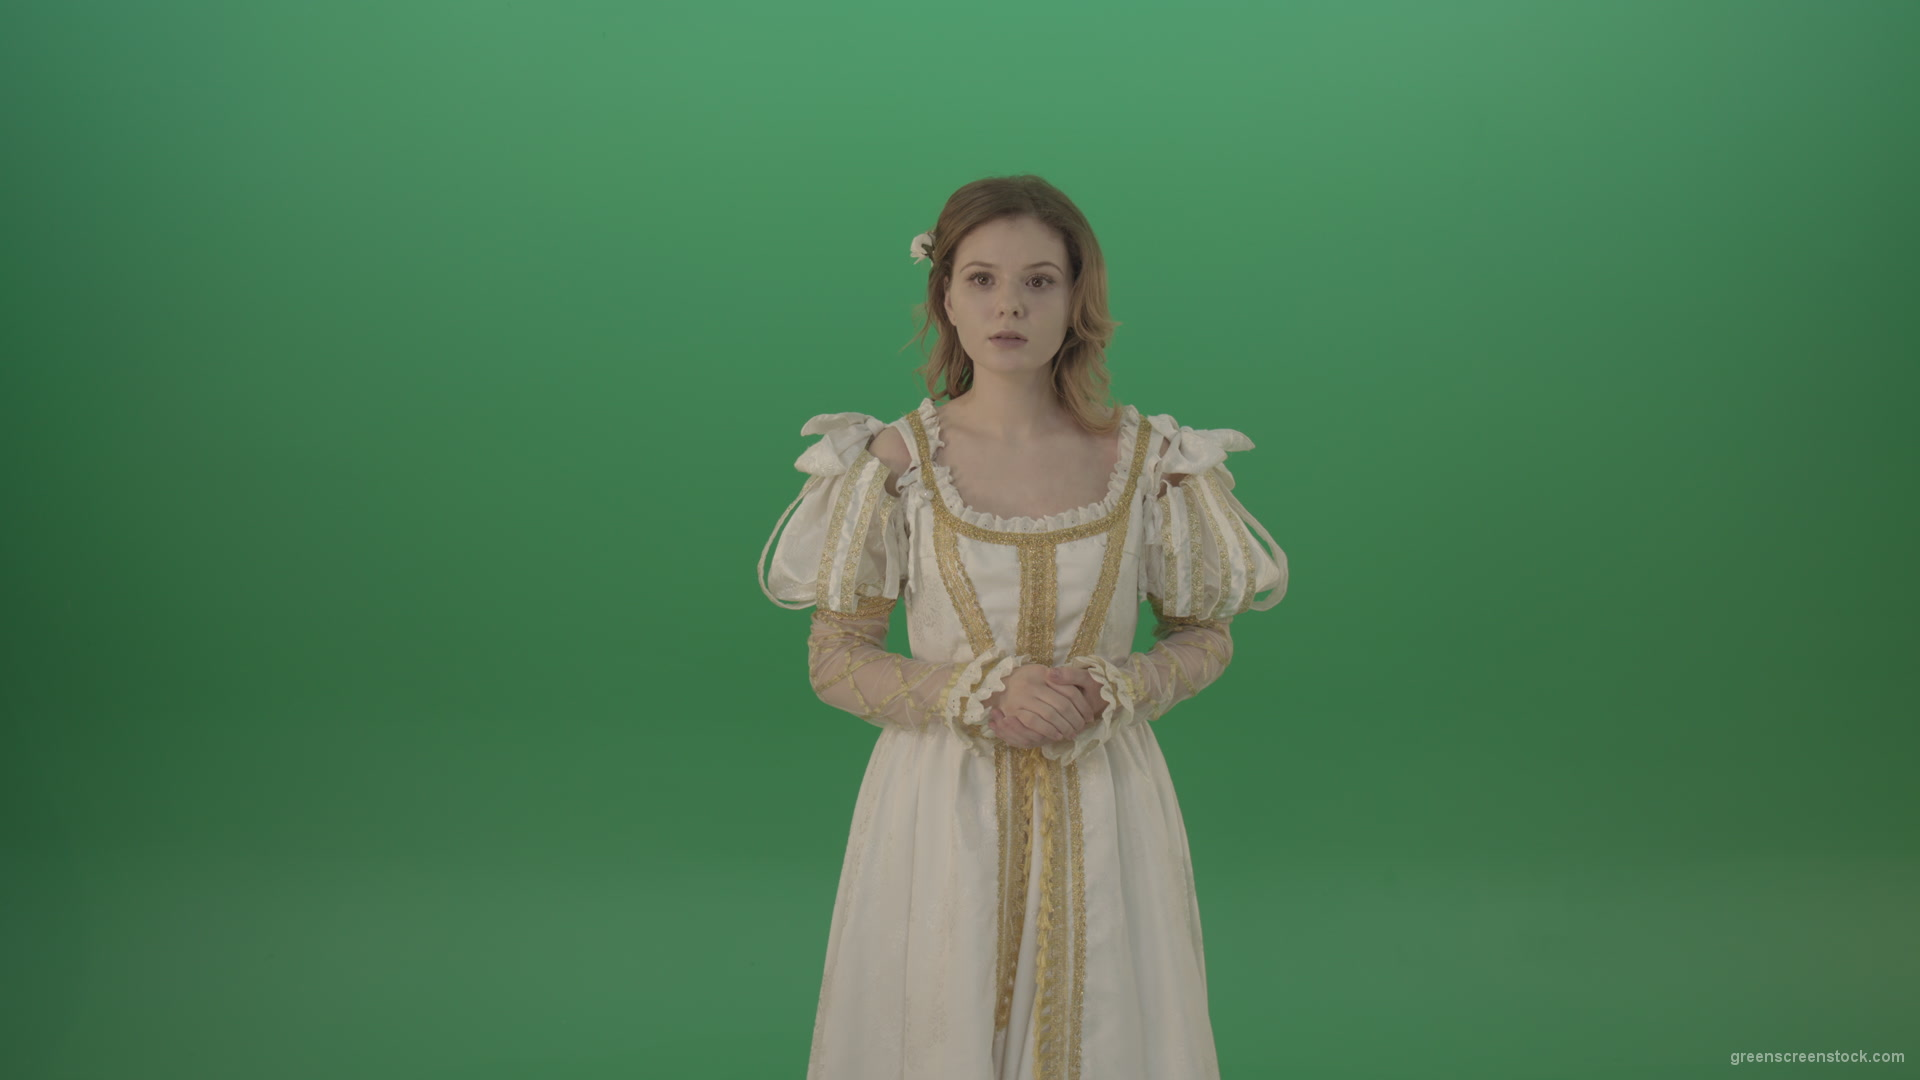 Girl-asks-to-be-quieter-in-a-white-dress-isolated-on-green-screen_002 Green Screen Stock